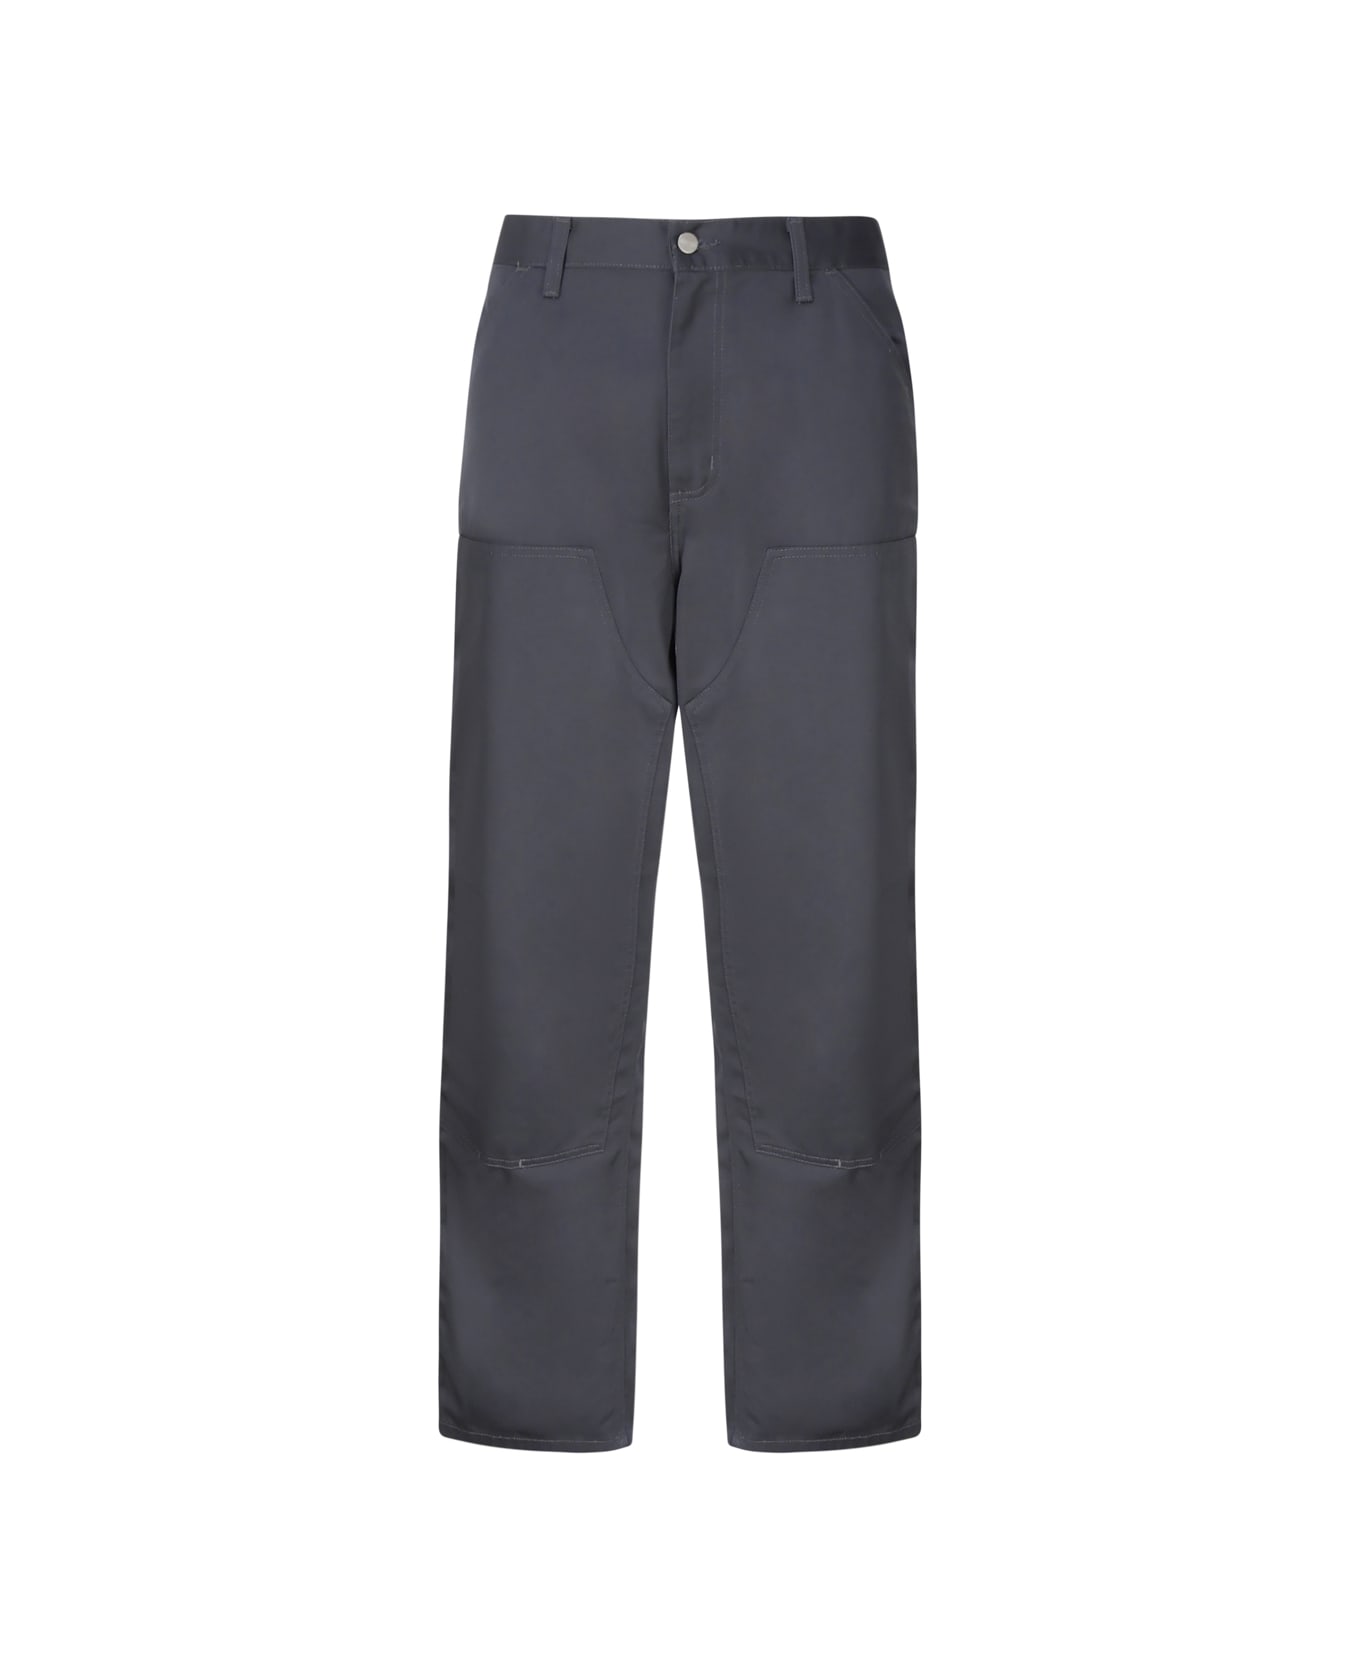 Carhartt Trousers With Knee Detail - Grey